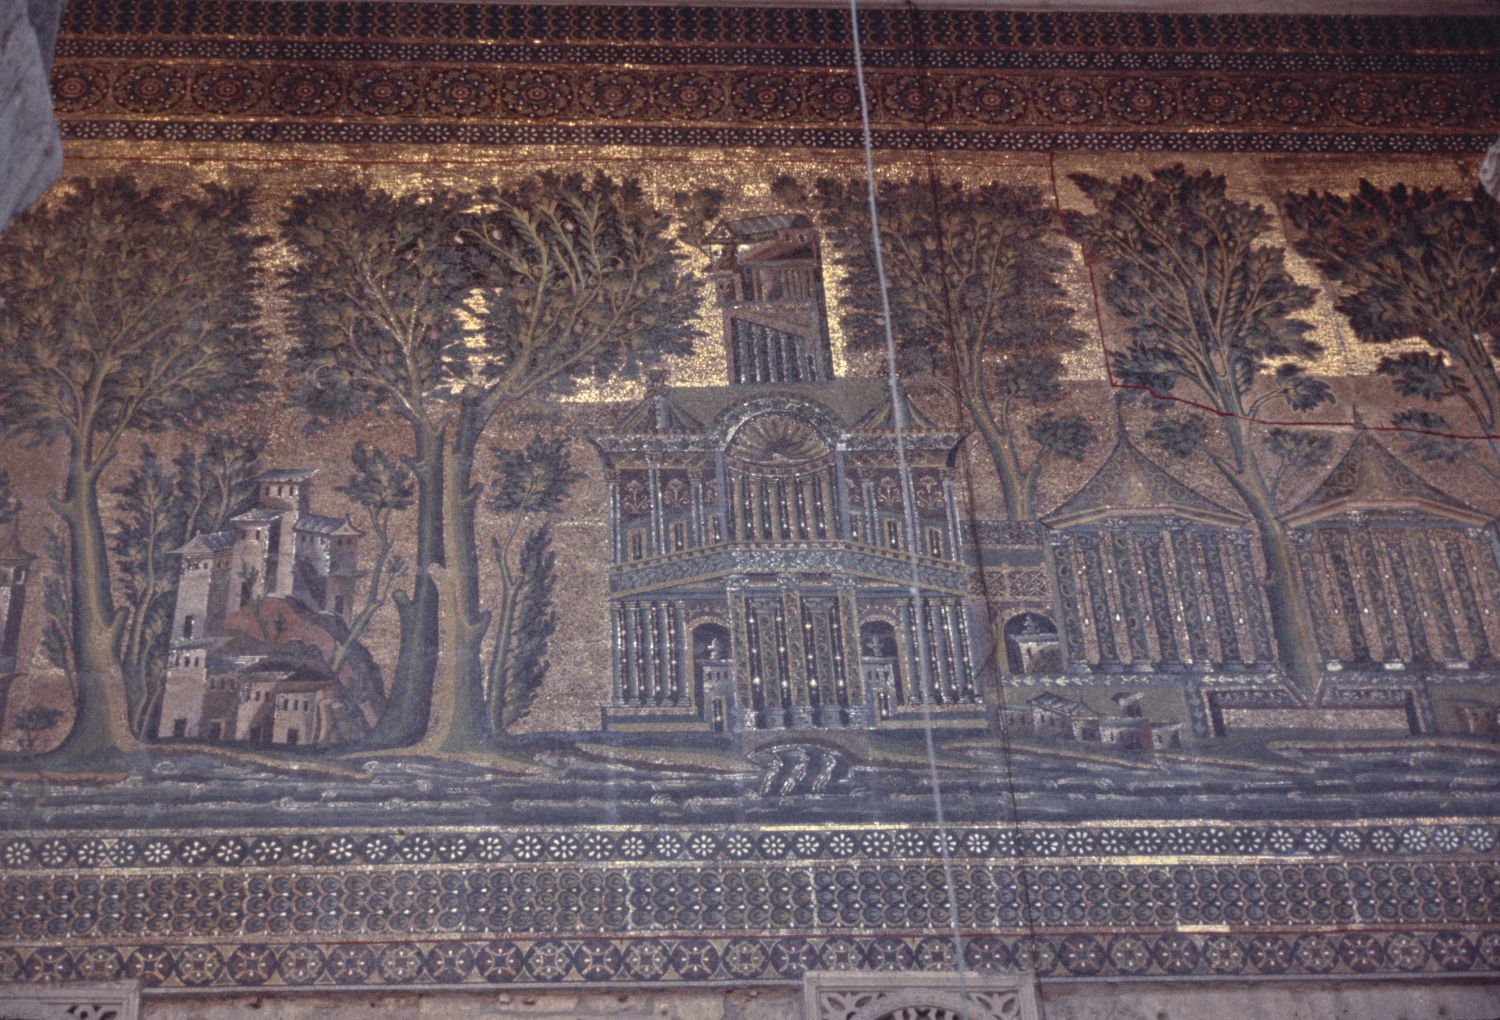 View of mosaics under the arcades surrounding courtyard, showing representations of villas and palatial architecture.